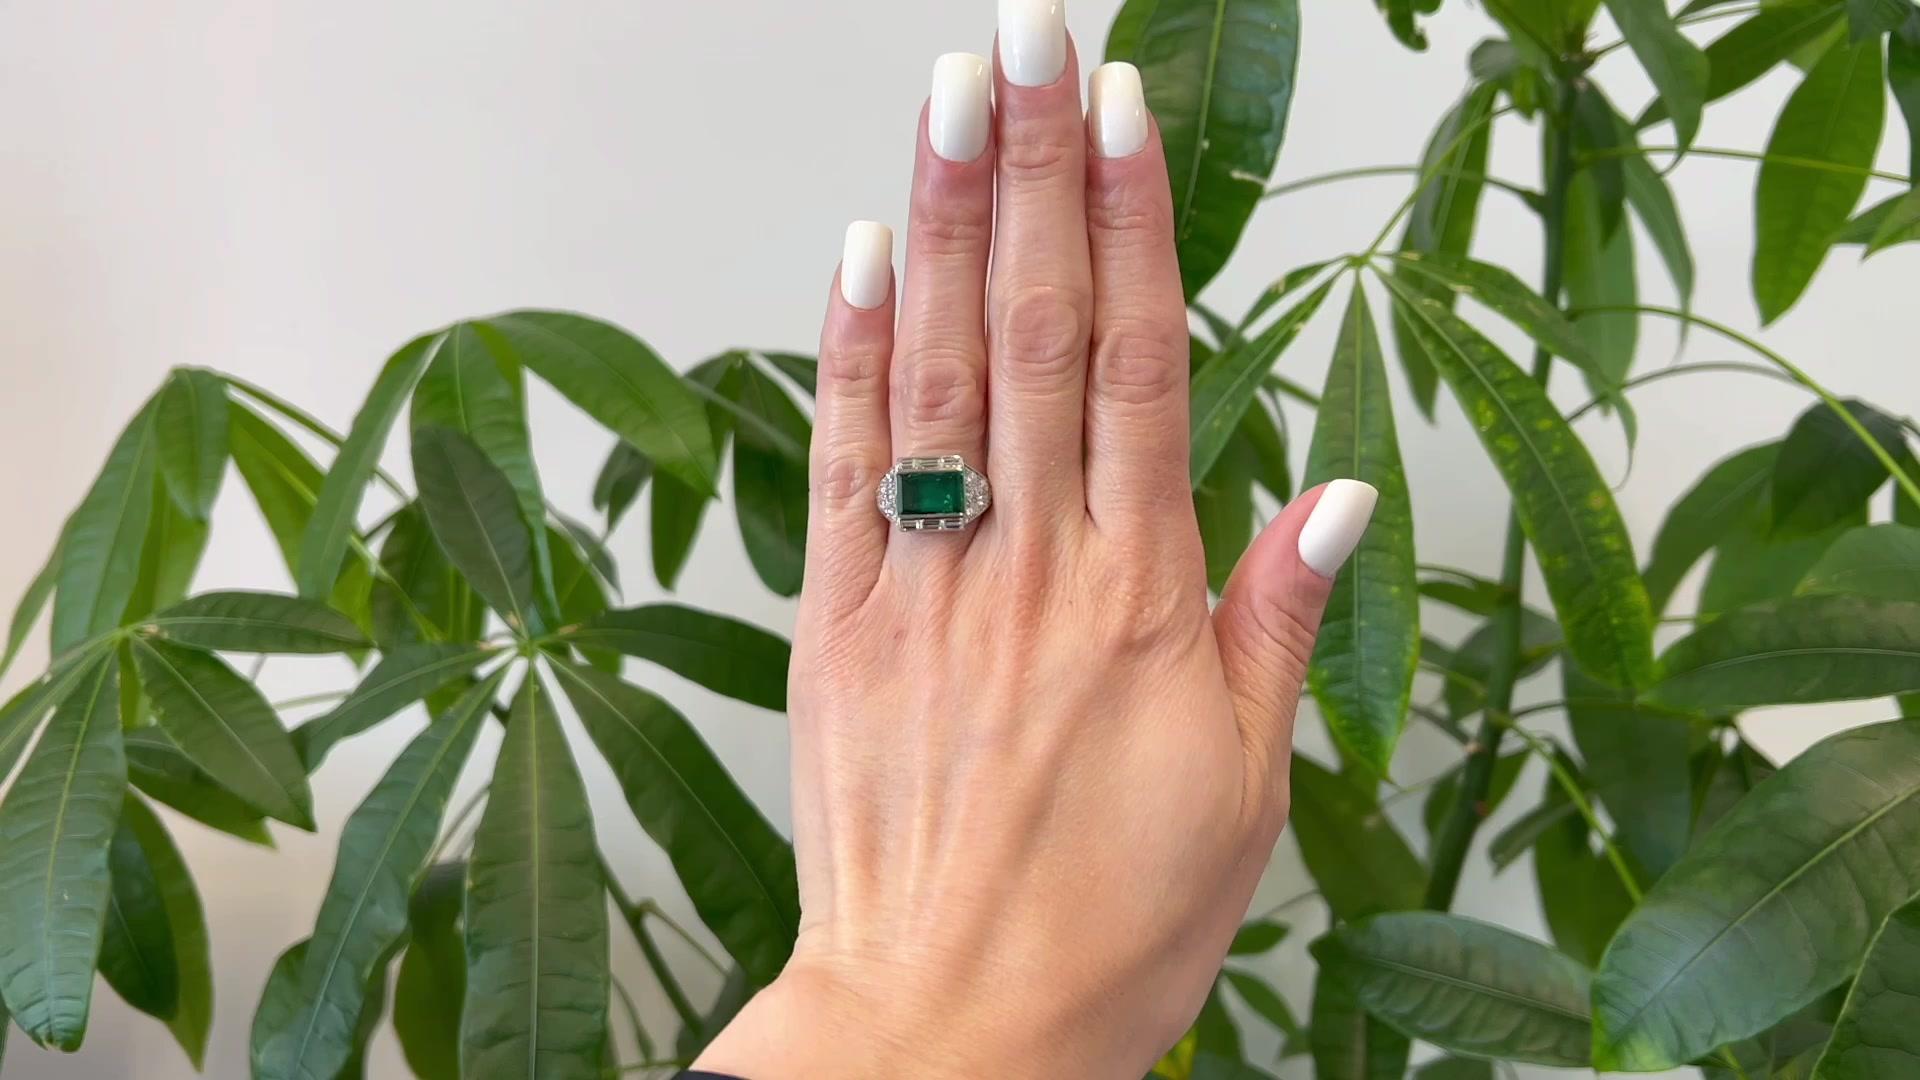 One Art Deco AGL 2.00 Carat Brazilian Minor Oil Diamond Platinum Ring. Featuring one AGL rectangular step cut emerald weighing approximately 2.00 carats, accompanied with AGL #1130631 stating the emerald is of Brazilian origin, and has minor oil.